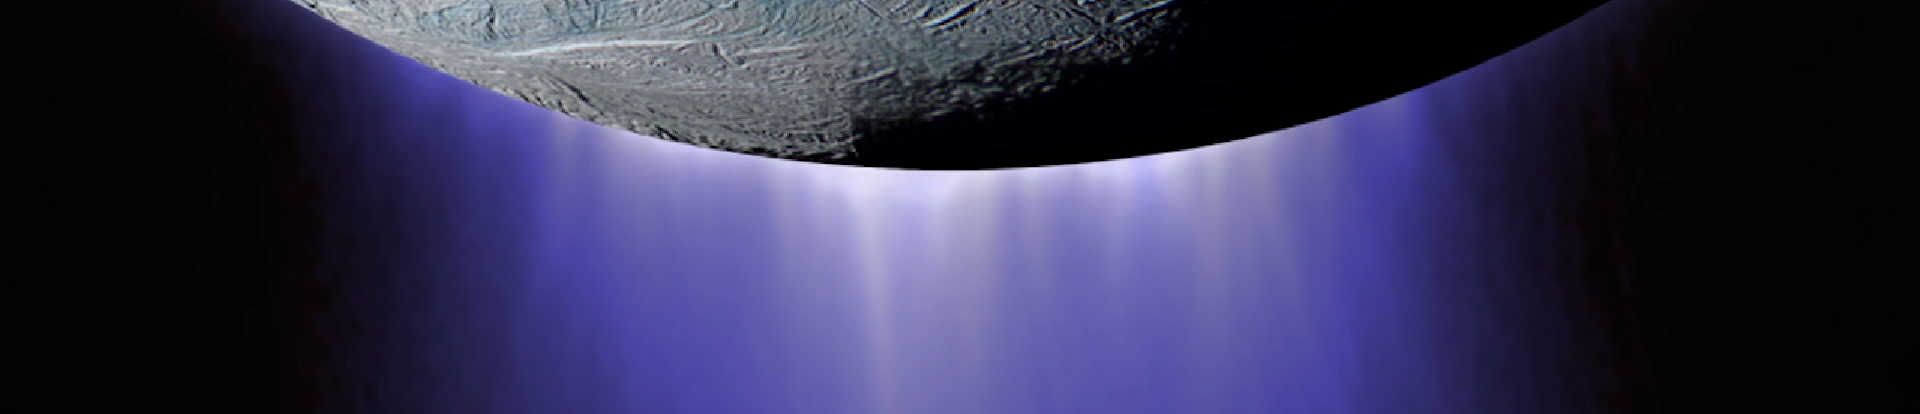 Go to press release: Webb Telescope finds towering plume of water escaping from Saturn moon